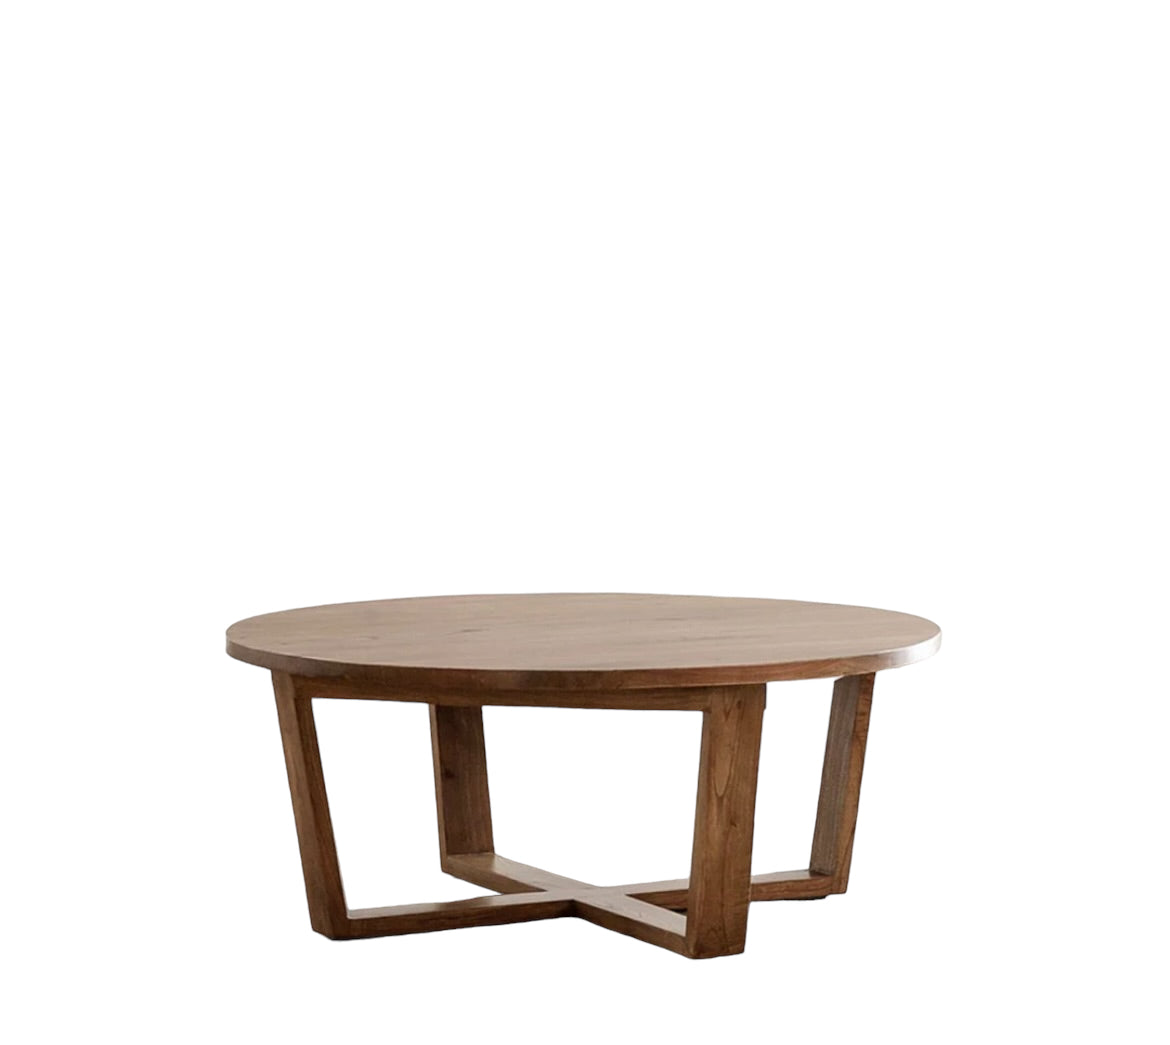 HAND MADE IVER SCANDINAVIAN ROUND WOODEN COFFEE TABLE